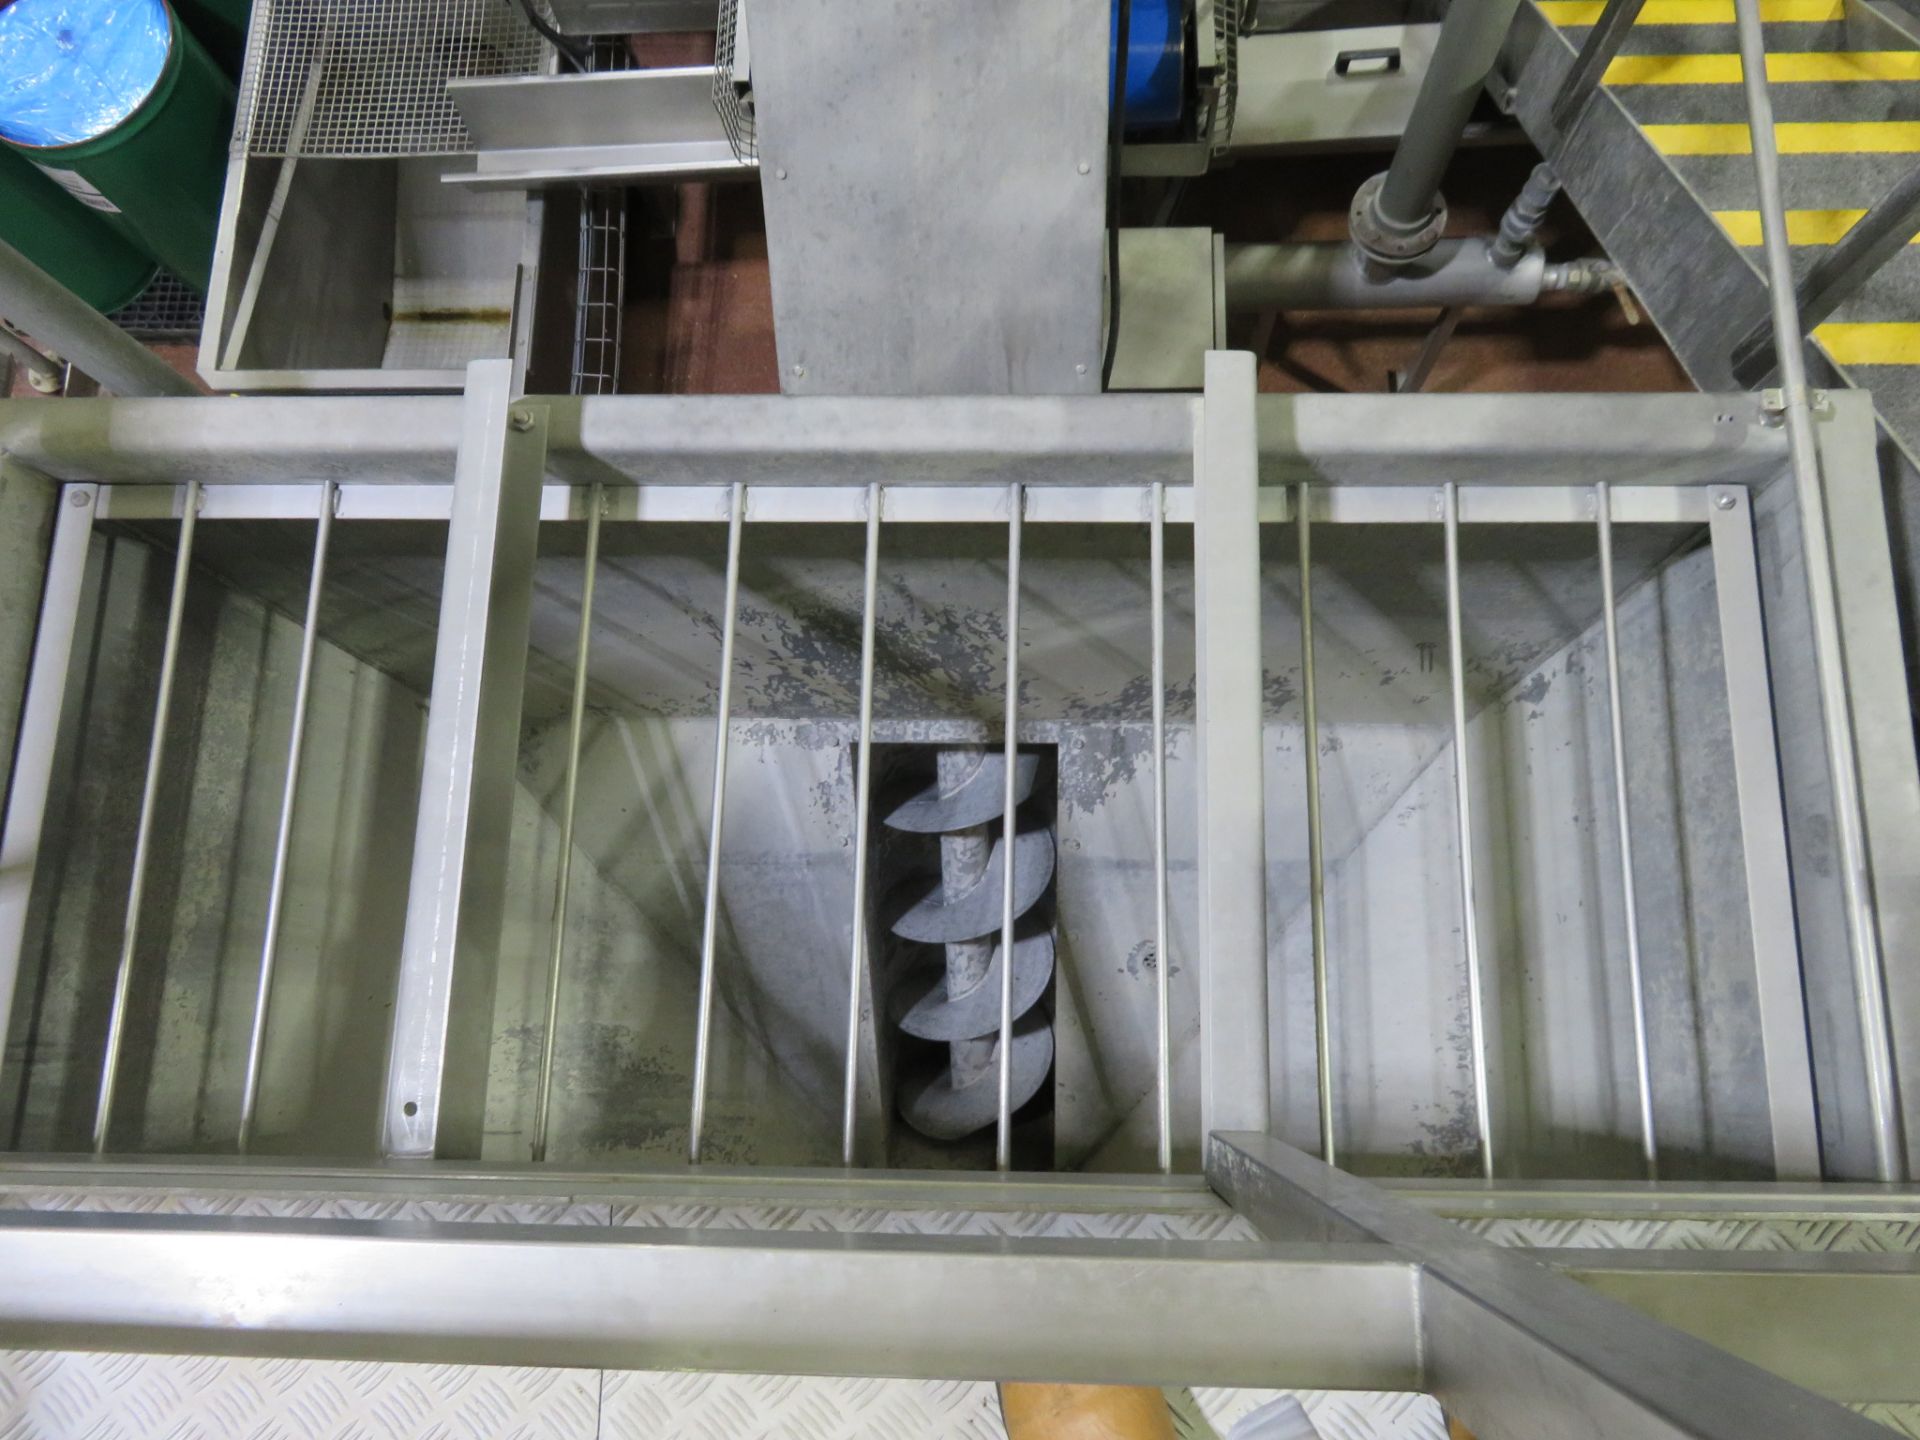 Water Screen product in and Screw Elevator. Inspection Conveyor approx. 7 meters long x 800m LO £800 - Image 3 of 7